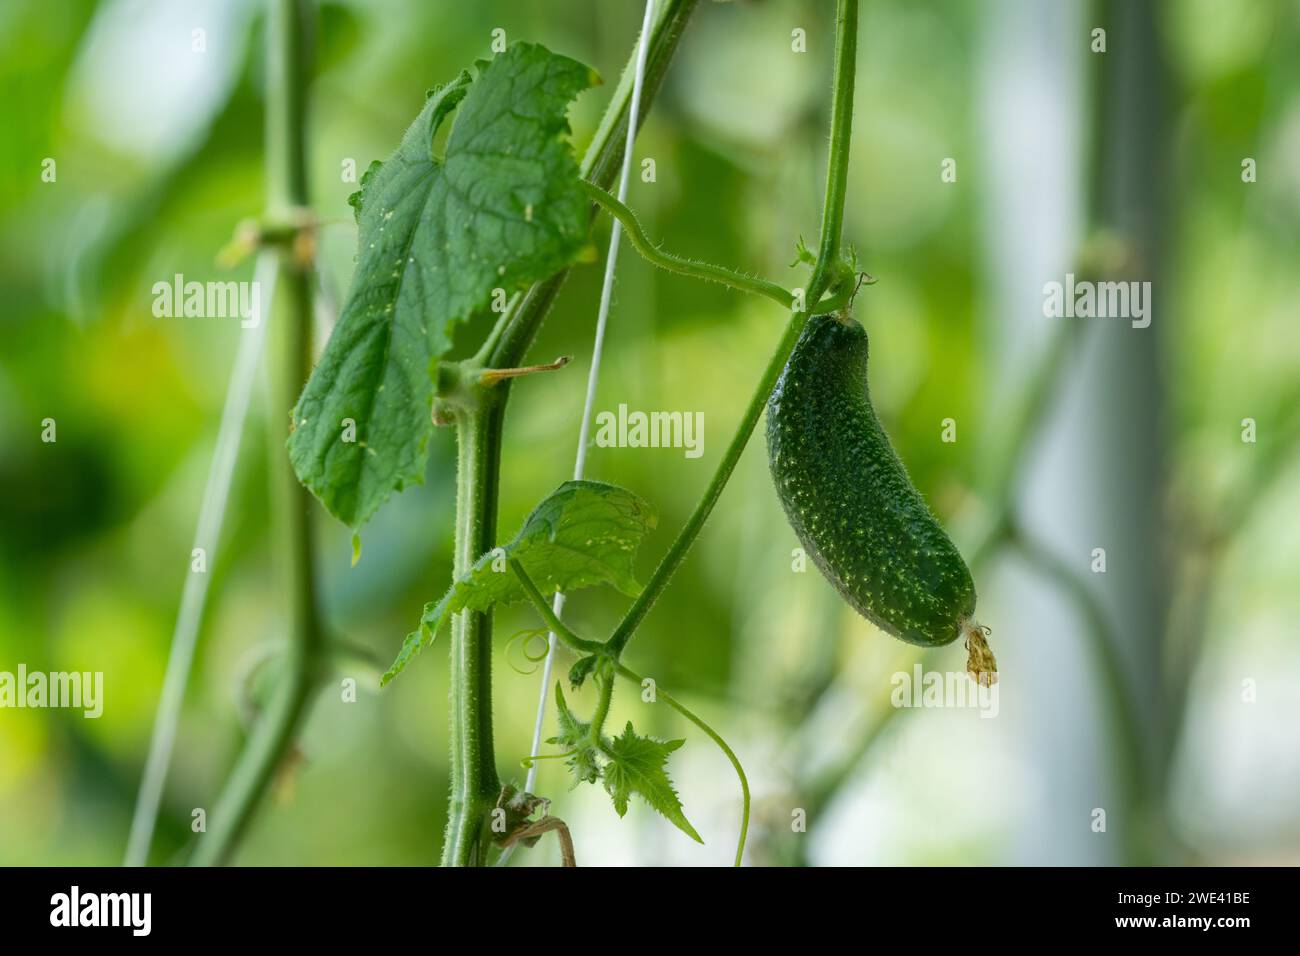 Plants in greenhouse. Greenhouse Cucumber. Cucumber plants growing. Cucumber (Cucumis sativus) Stock Photo